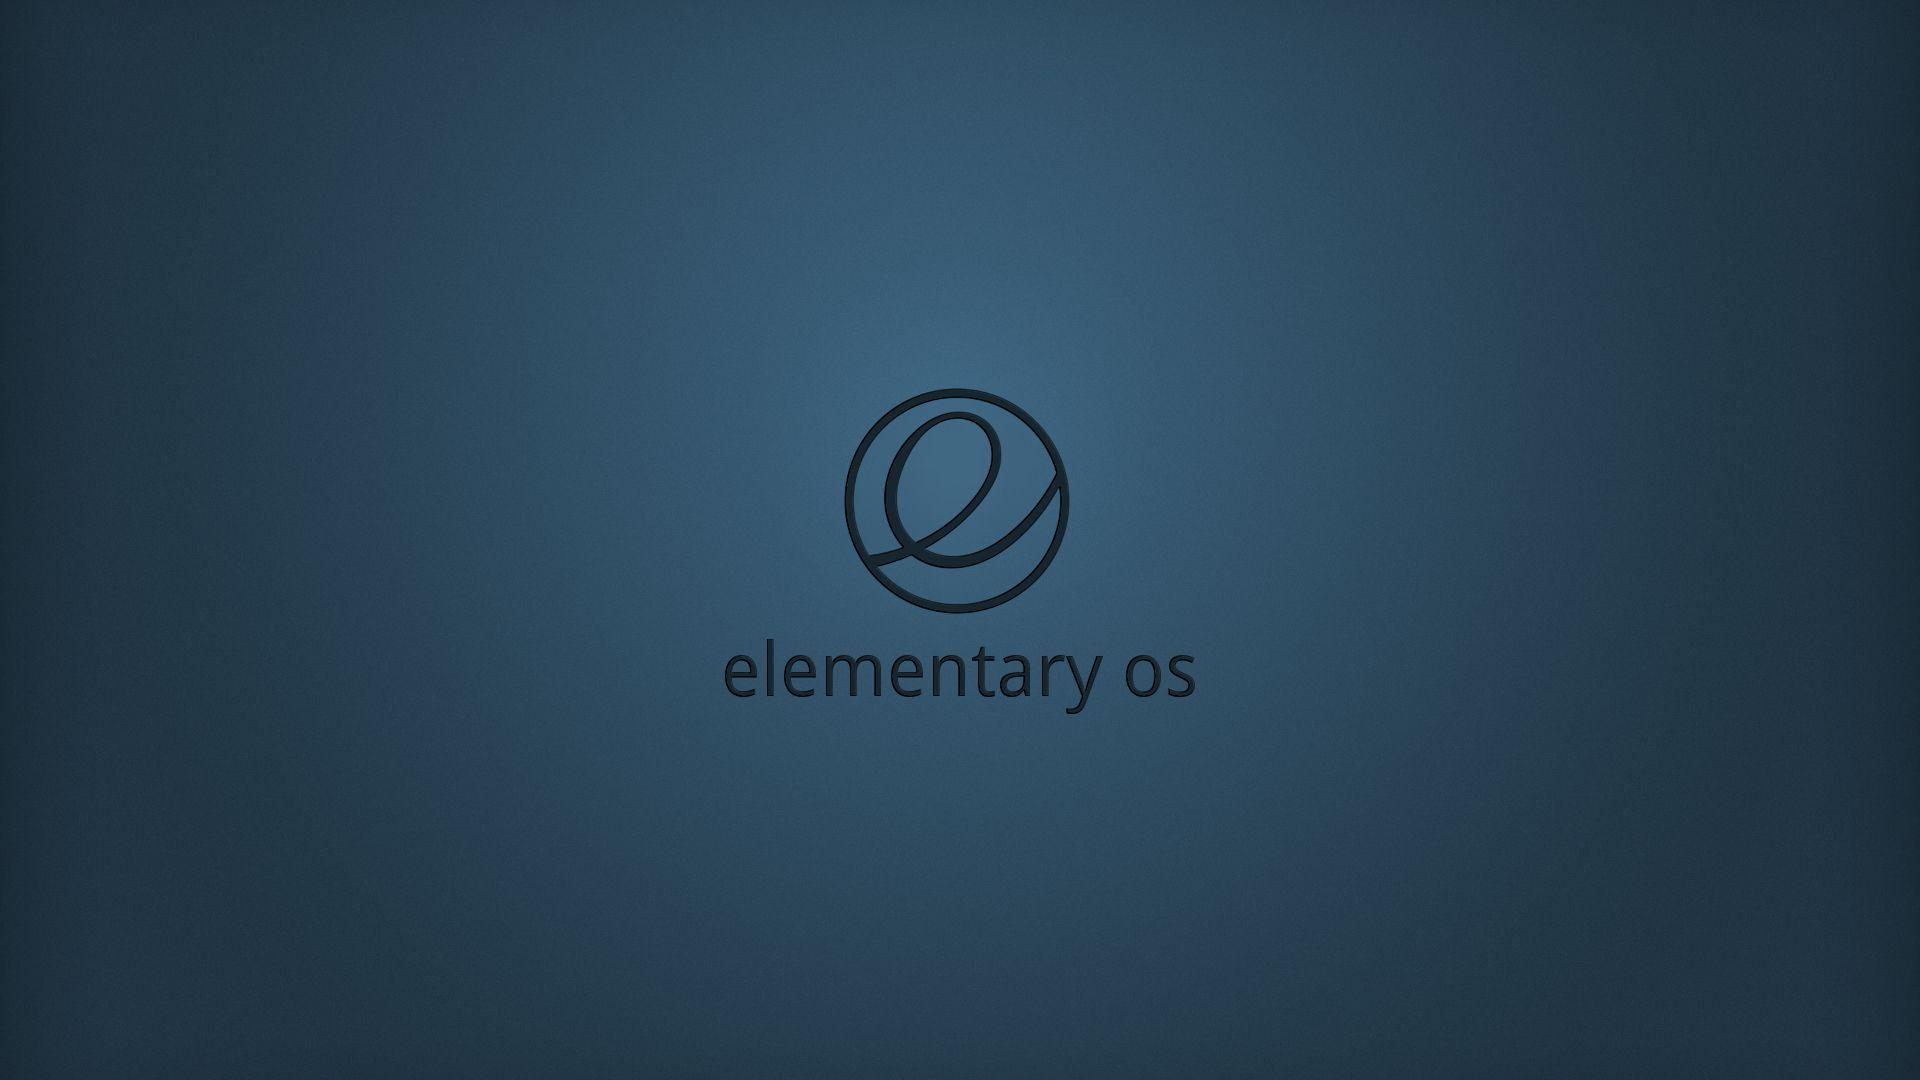 Elementary Os Wallpaper Download